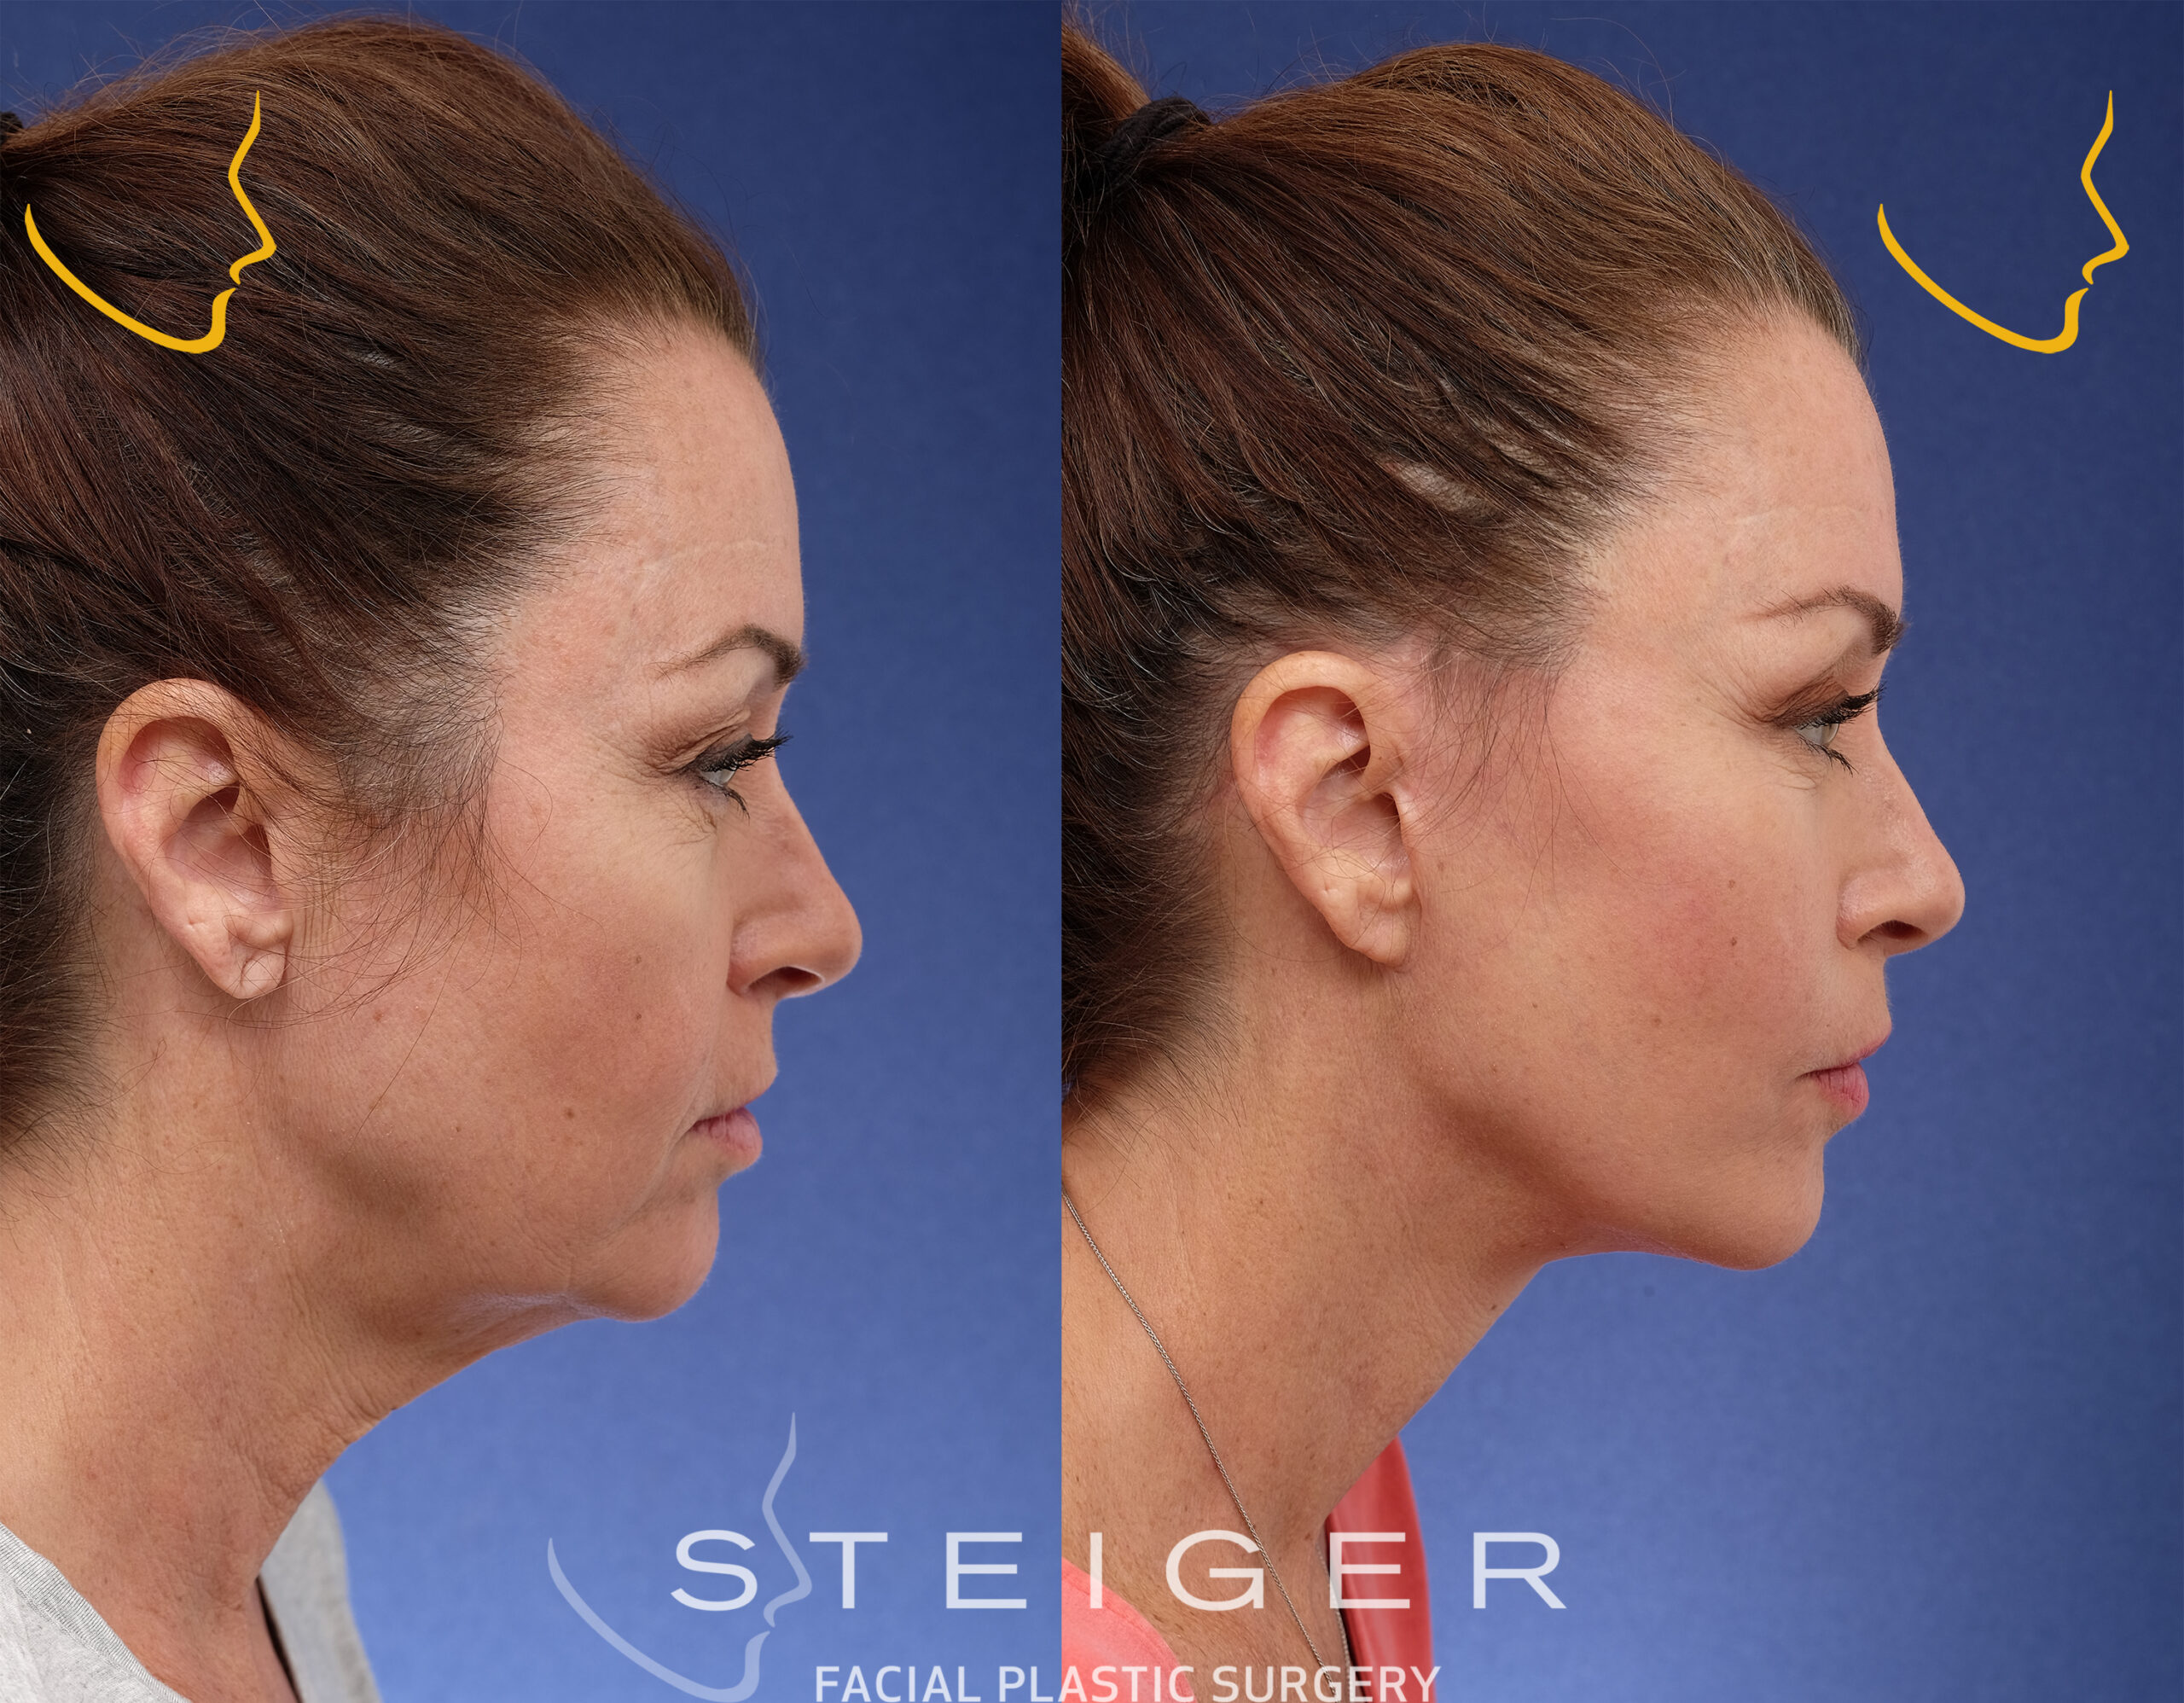 Facelift Insta0oct Scaled 